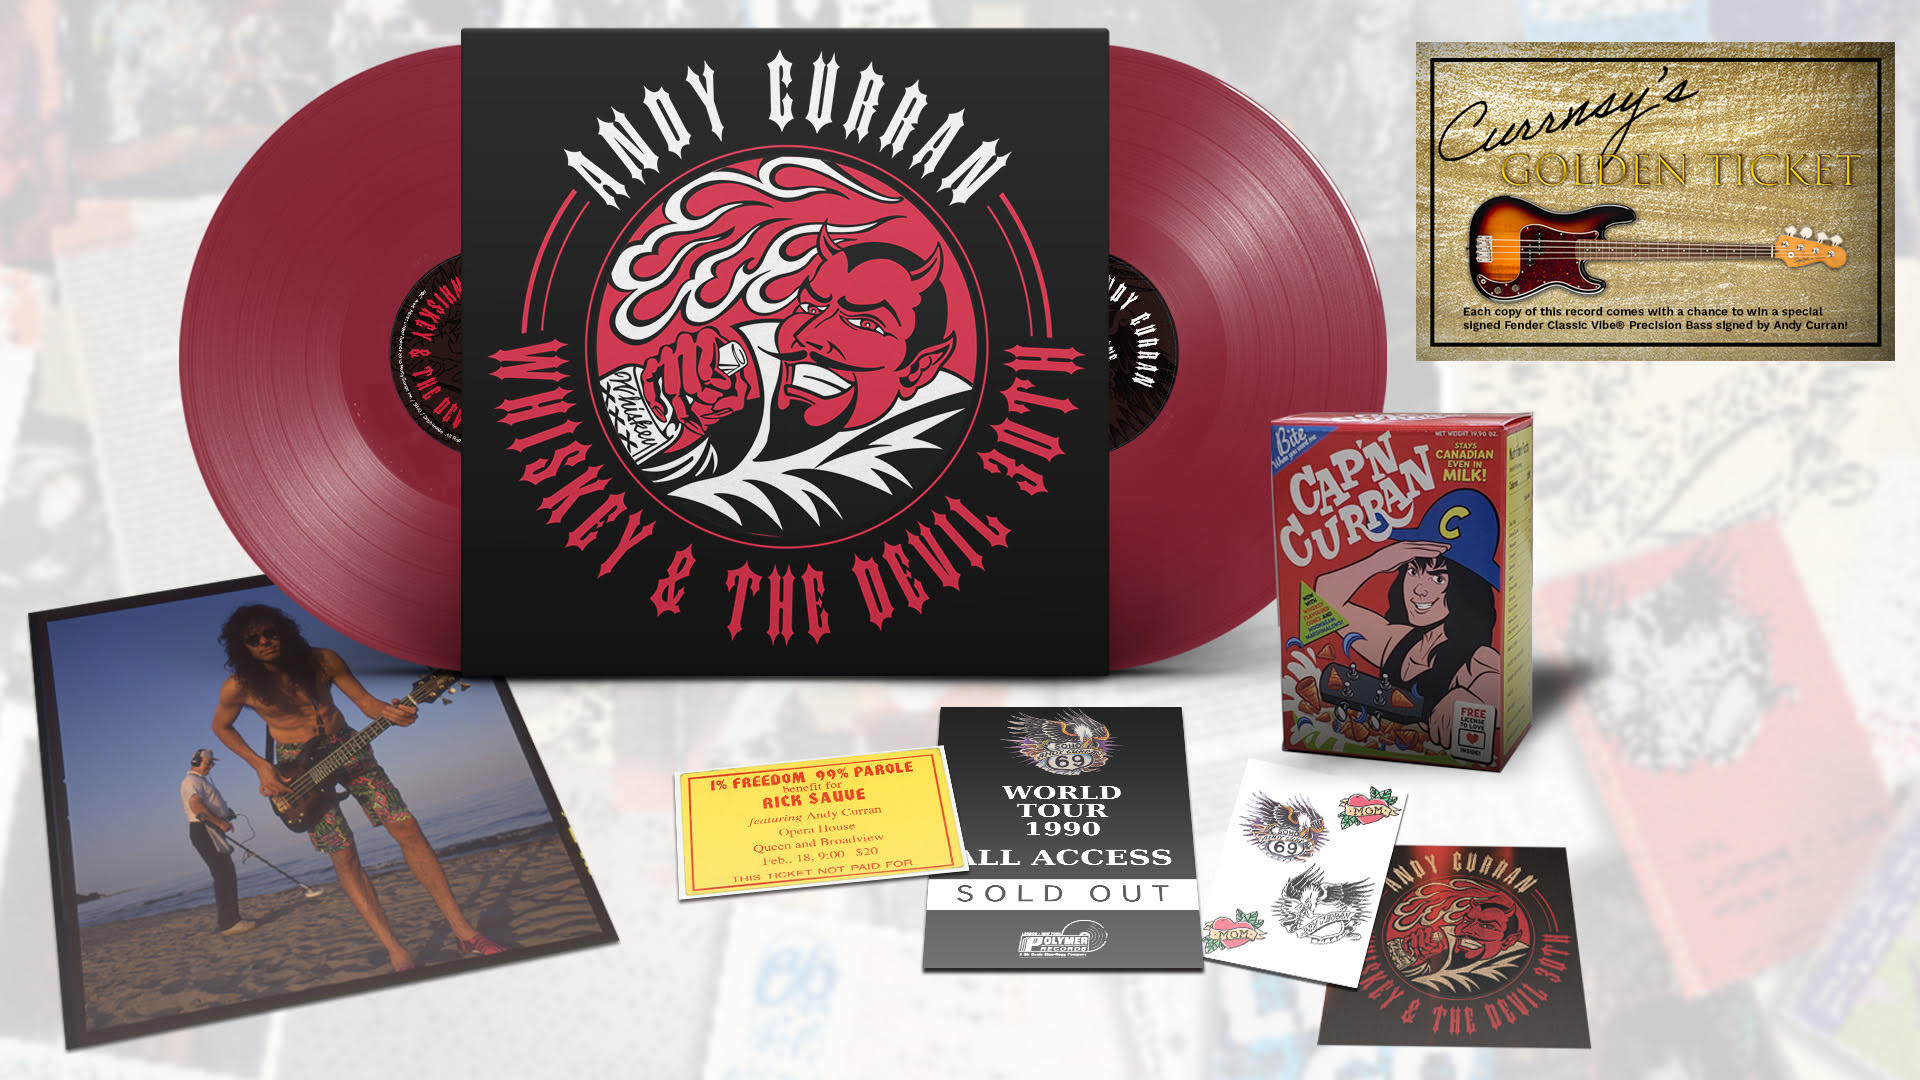 ANDY CURRAN (CONEY HATCH) AND HAREM SCAREM ISSUE NEW LIMITED CLASSIC VINYL / DIGITAL HYBRID RELEASES AVAILABLE THROUGH NEW ONLINE RECORD STORE, SING MARKET